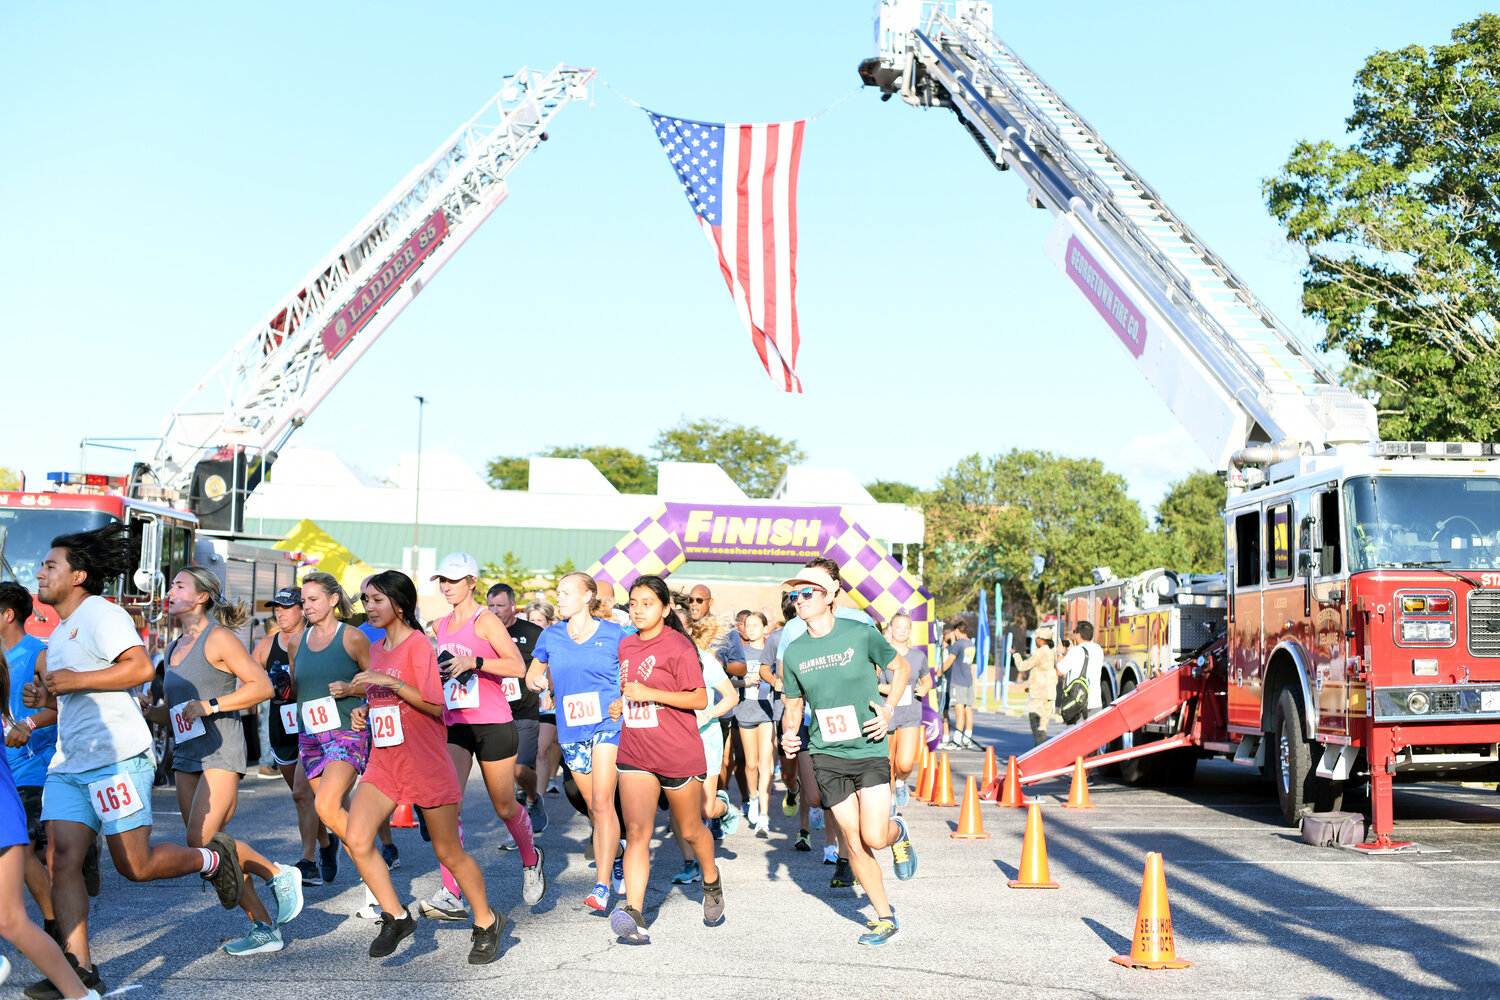 Nearly 500 runners and walkers competed in the 2022 Run, White & Blue 5K run/1-mile walk. This year's event takes place Thursday at Delaware Technical Community College's Owens Campus in Georgetown and benefits scholarships for veterans and first responders.